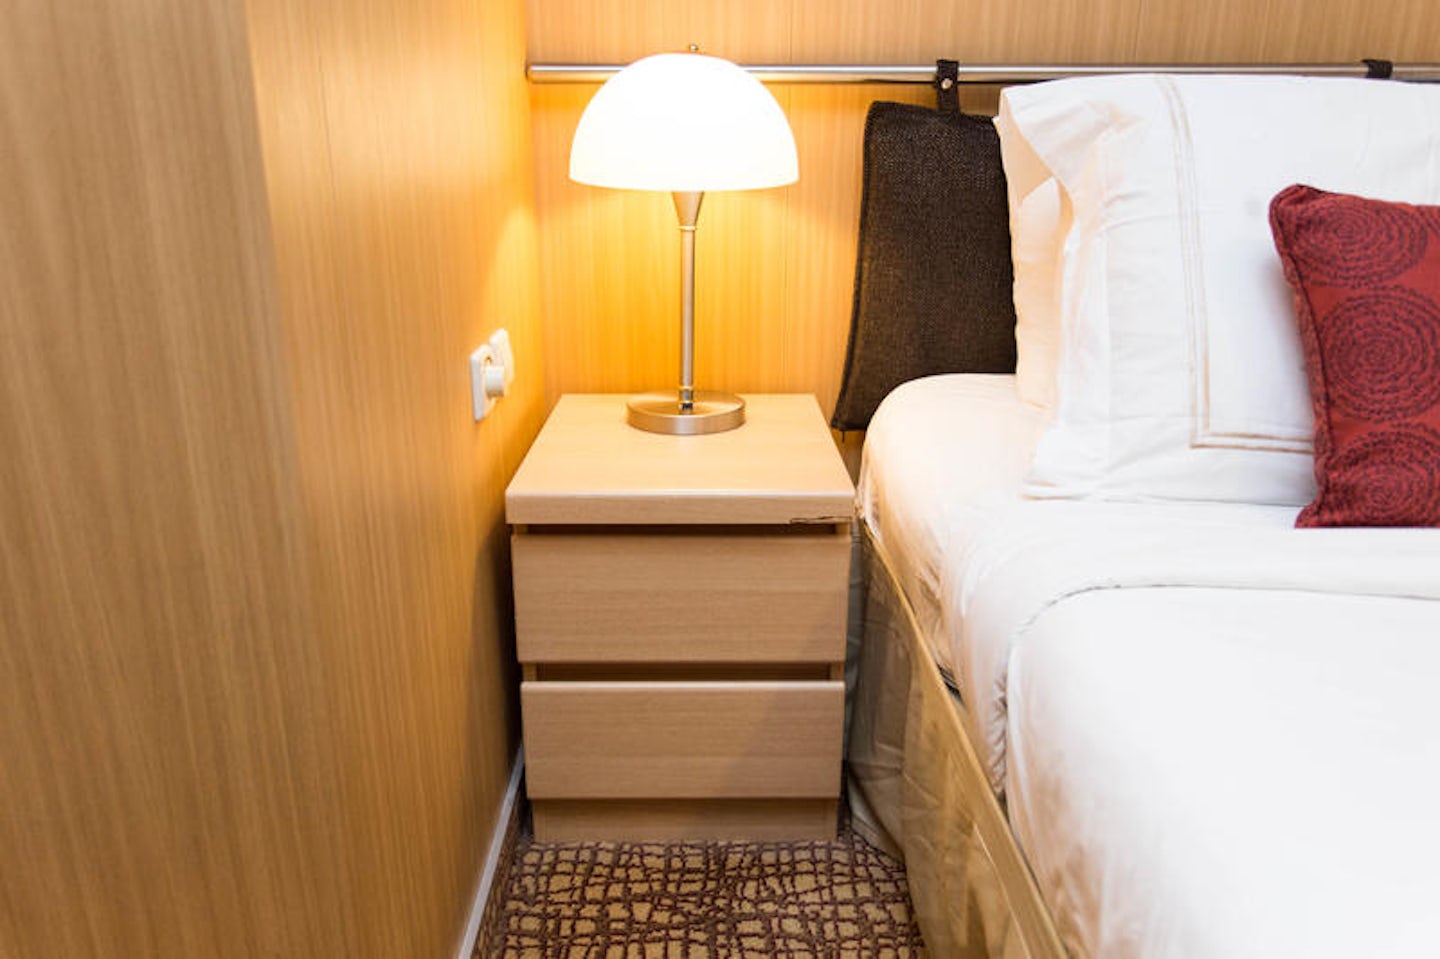 The AquaClass Cabin on Celebrity Infinity